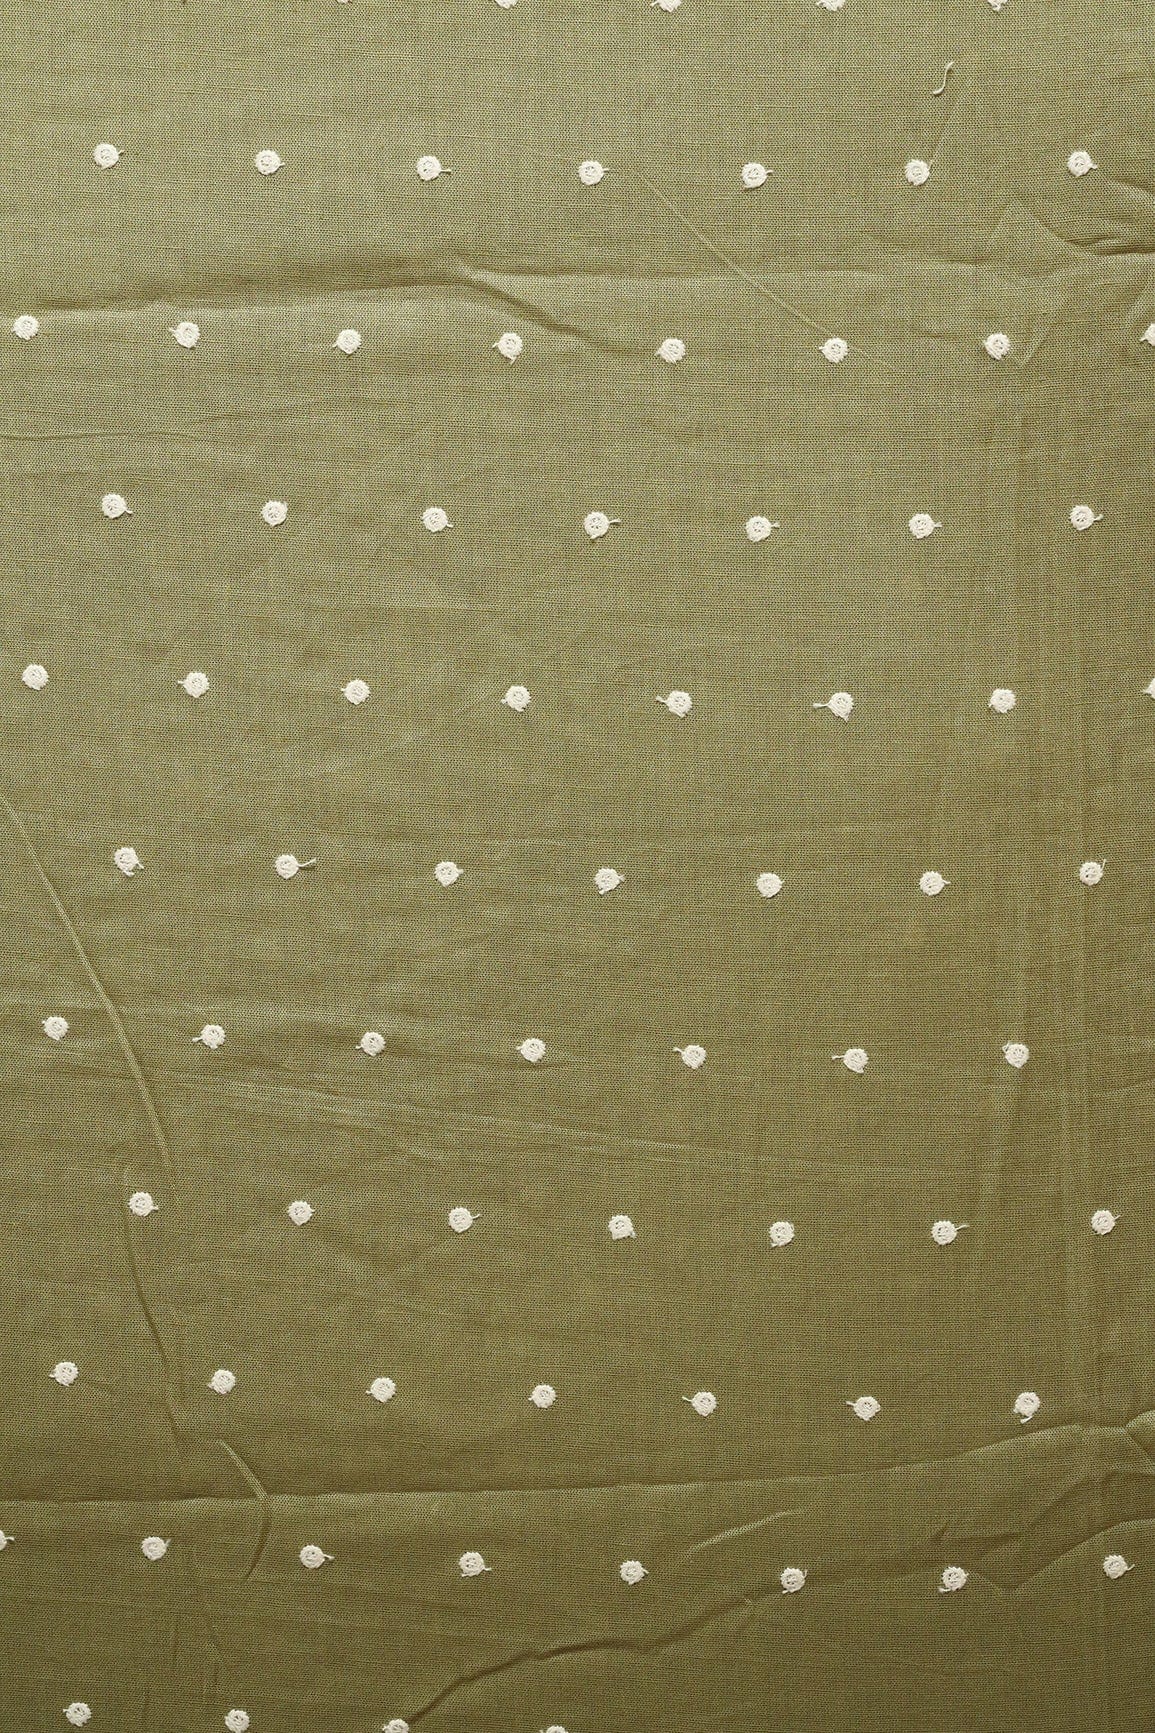 doeraa Embroidery Fabrics White Thread Small Polka Embroidery Work On Olive Cotton Linen Fabric